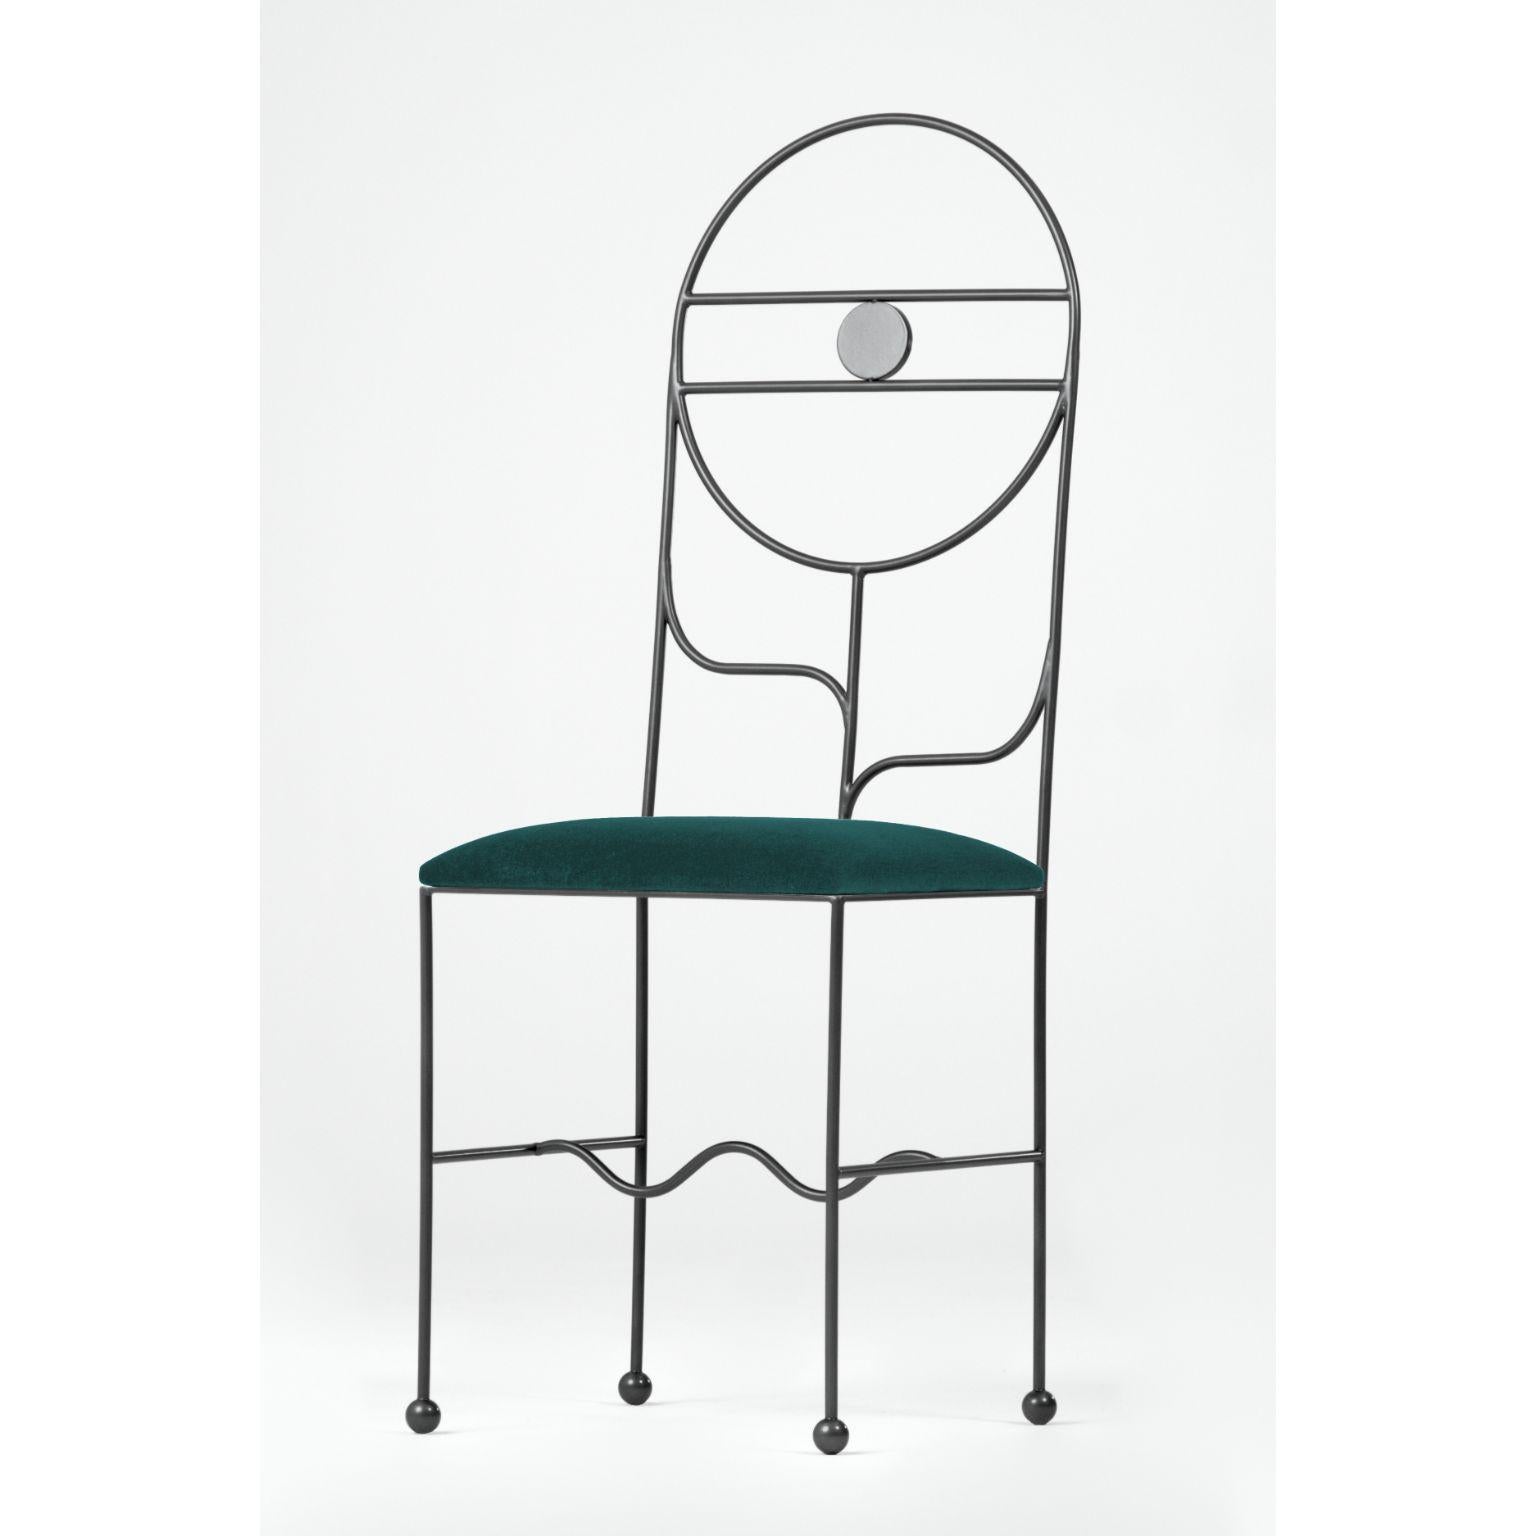 Stainless Steel Set of 8 Collezione Surrealista Chairs with Cushions by Qvinto Studio For Sale